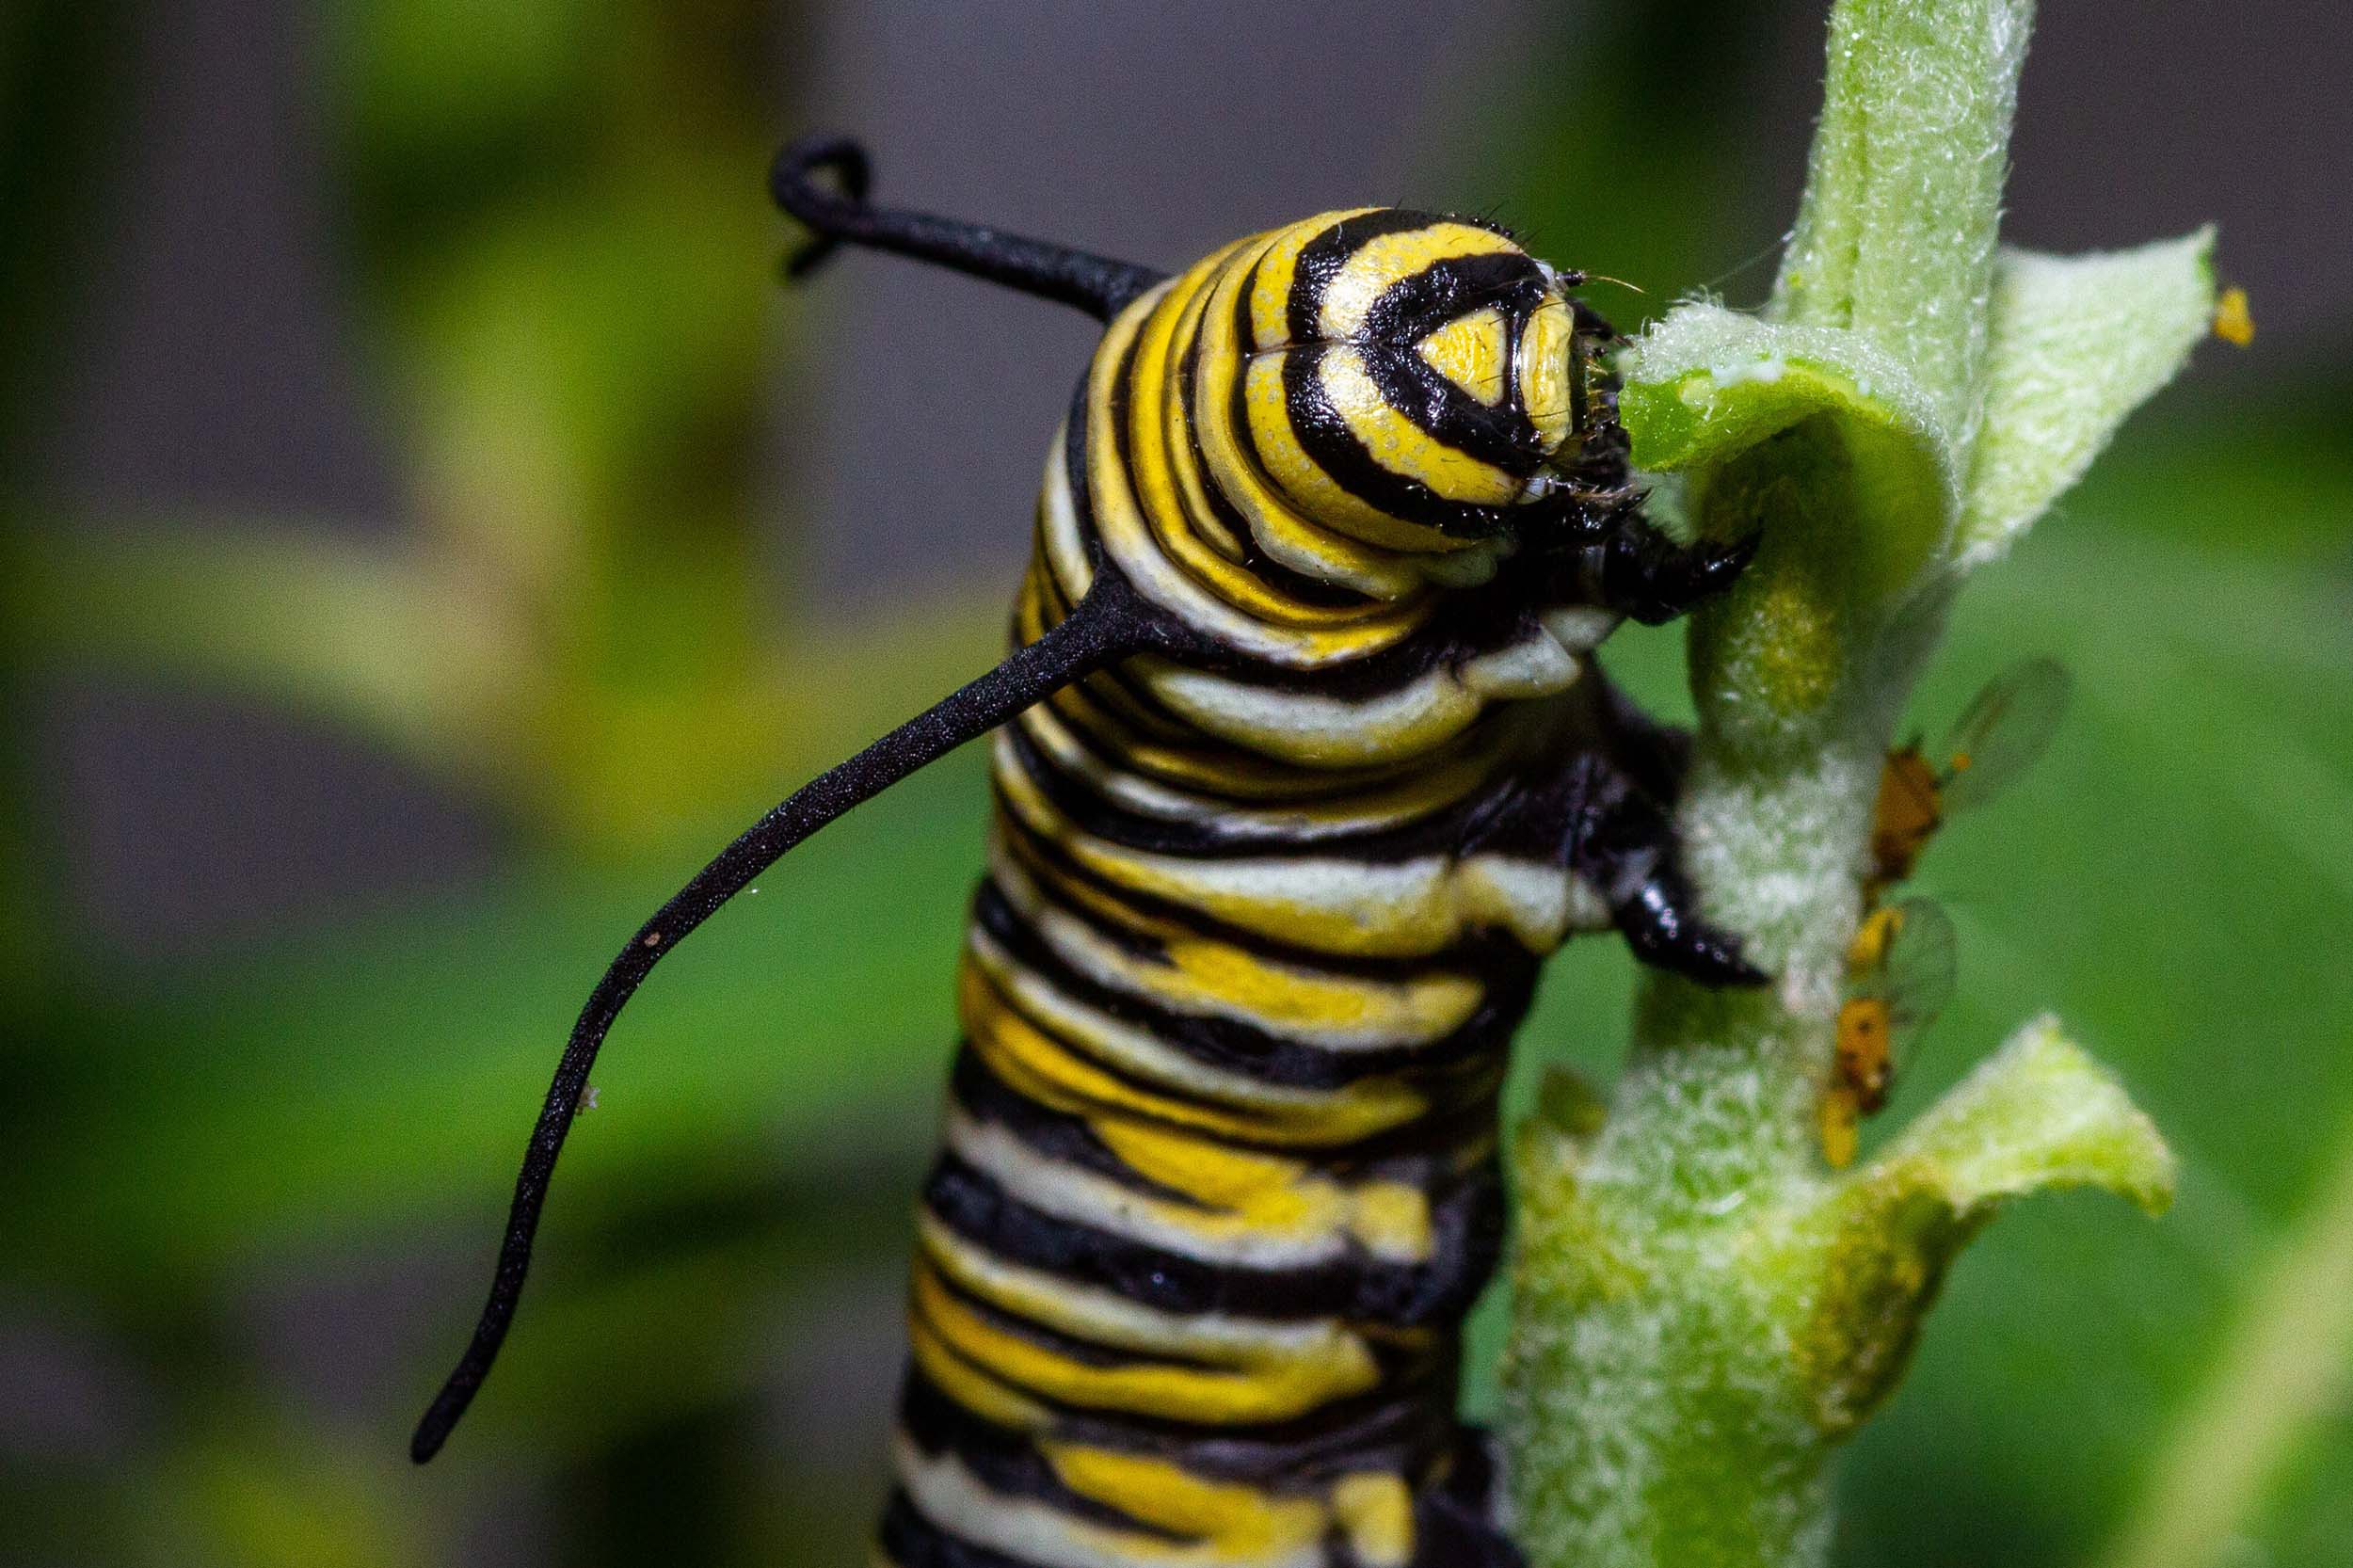 Photo: a yellow, black and white striped monarch caterpillar on a plant stem